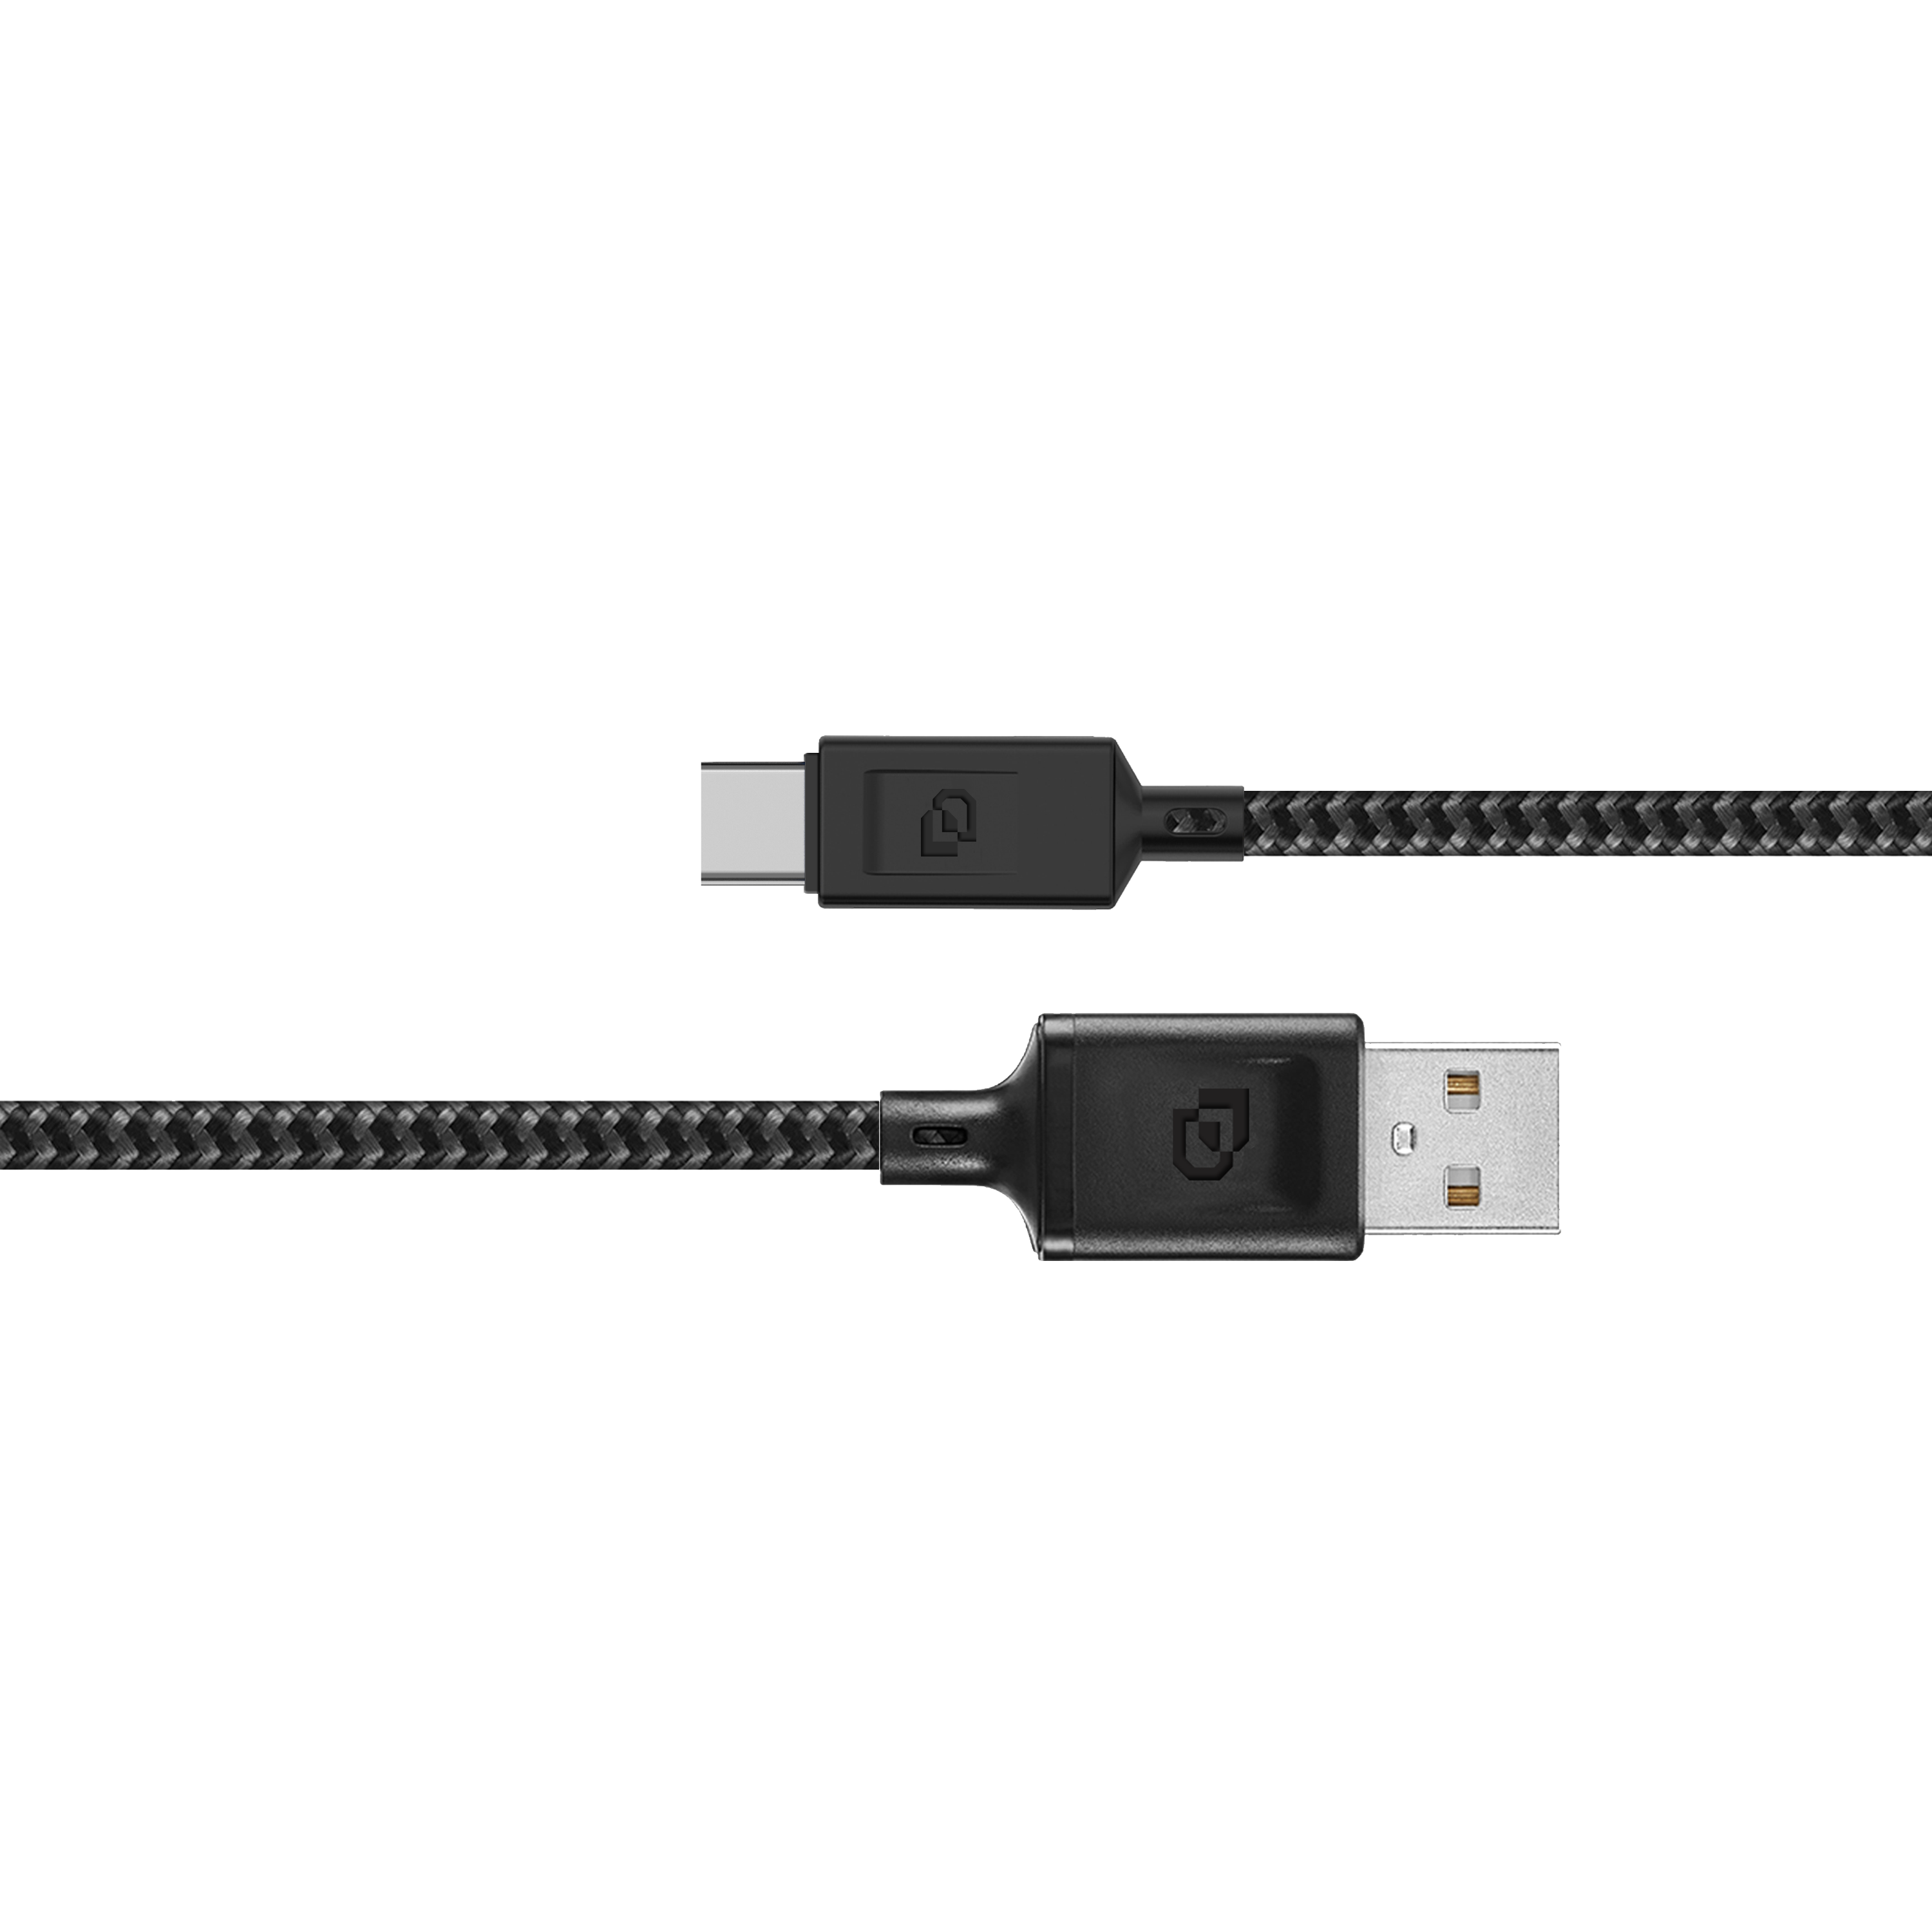  - Cable USB-A a USB-C, USB 2.0, 1.2 Mt Rugged Dusted negro 2